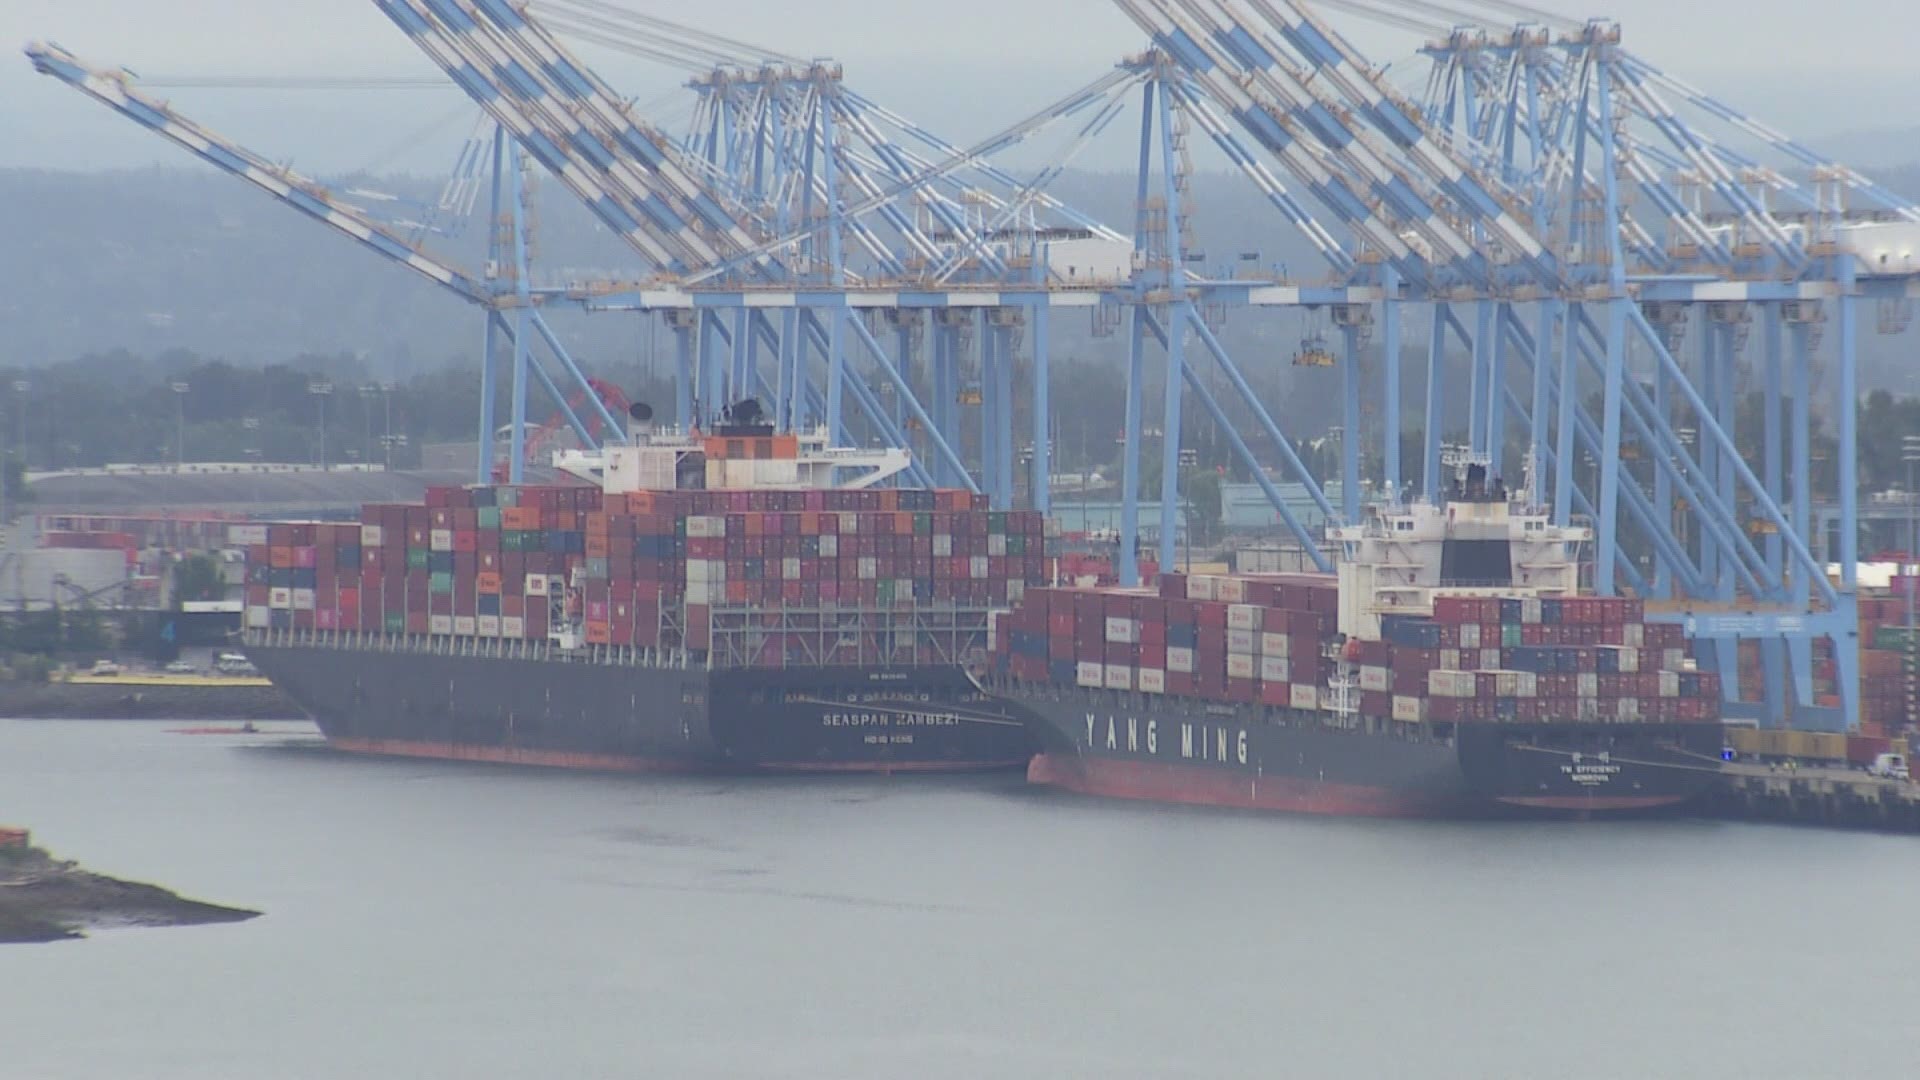 The Port of Seattle is one of many ports across the Northwest region asking for community feedback on a plan to phase out seaport related air emissions by 2050.